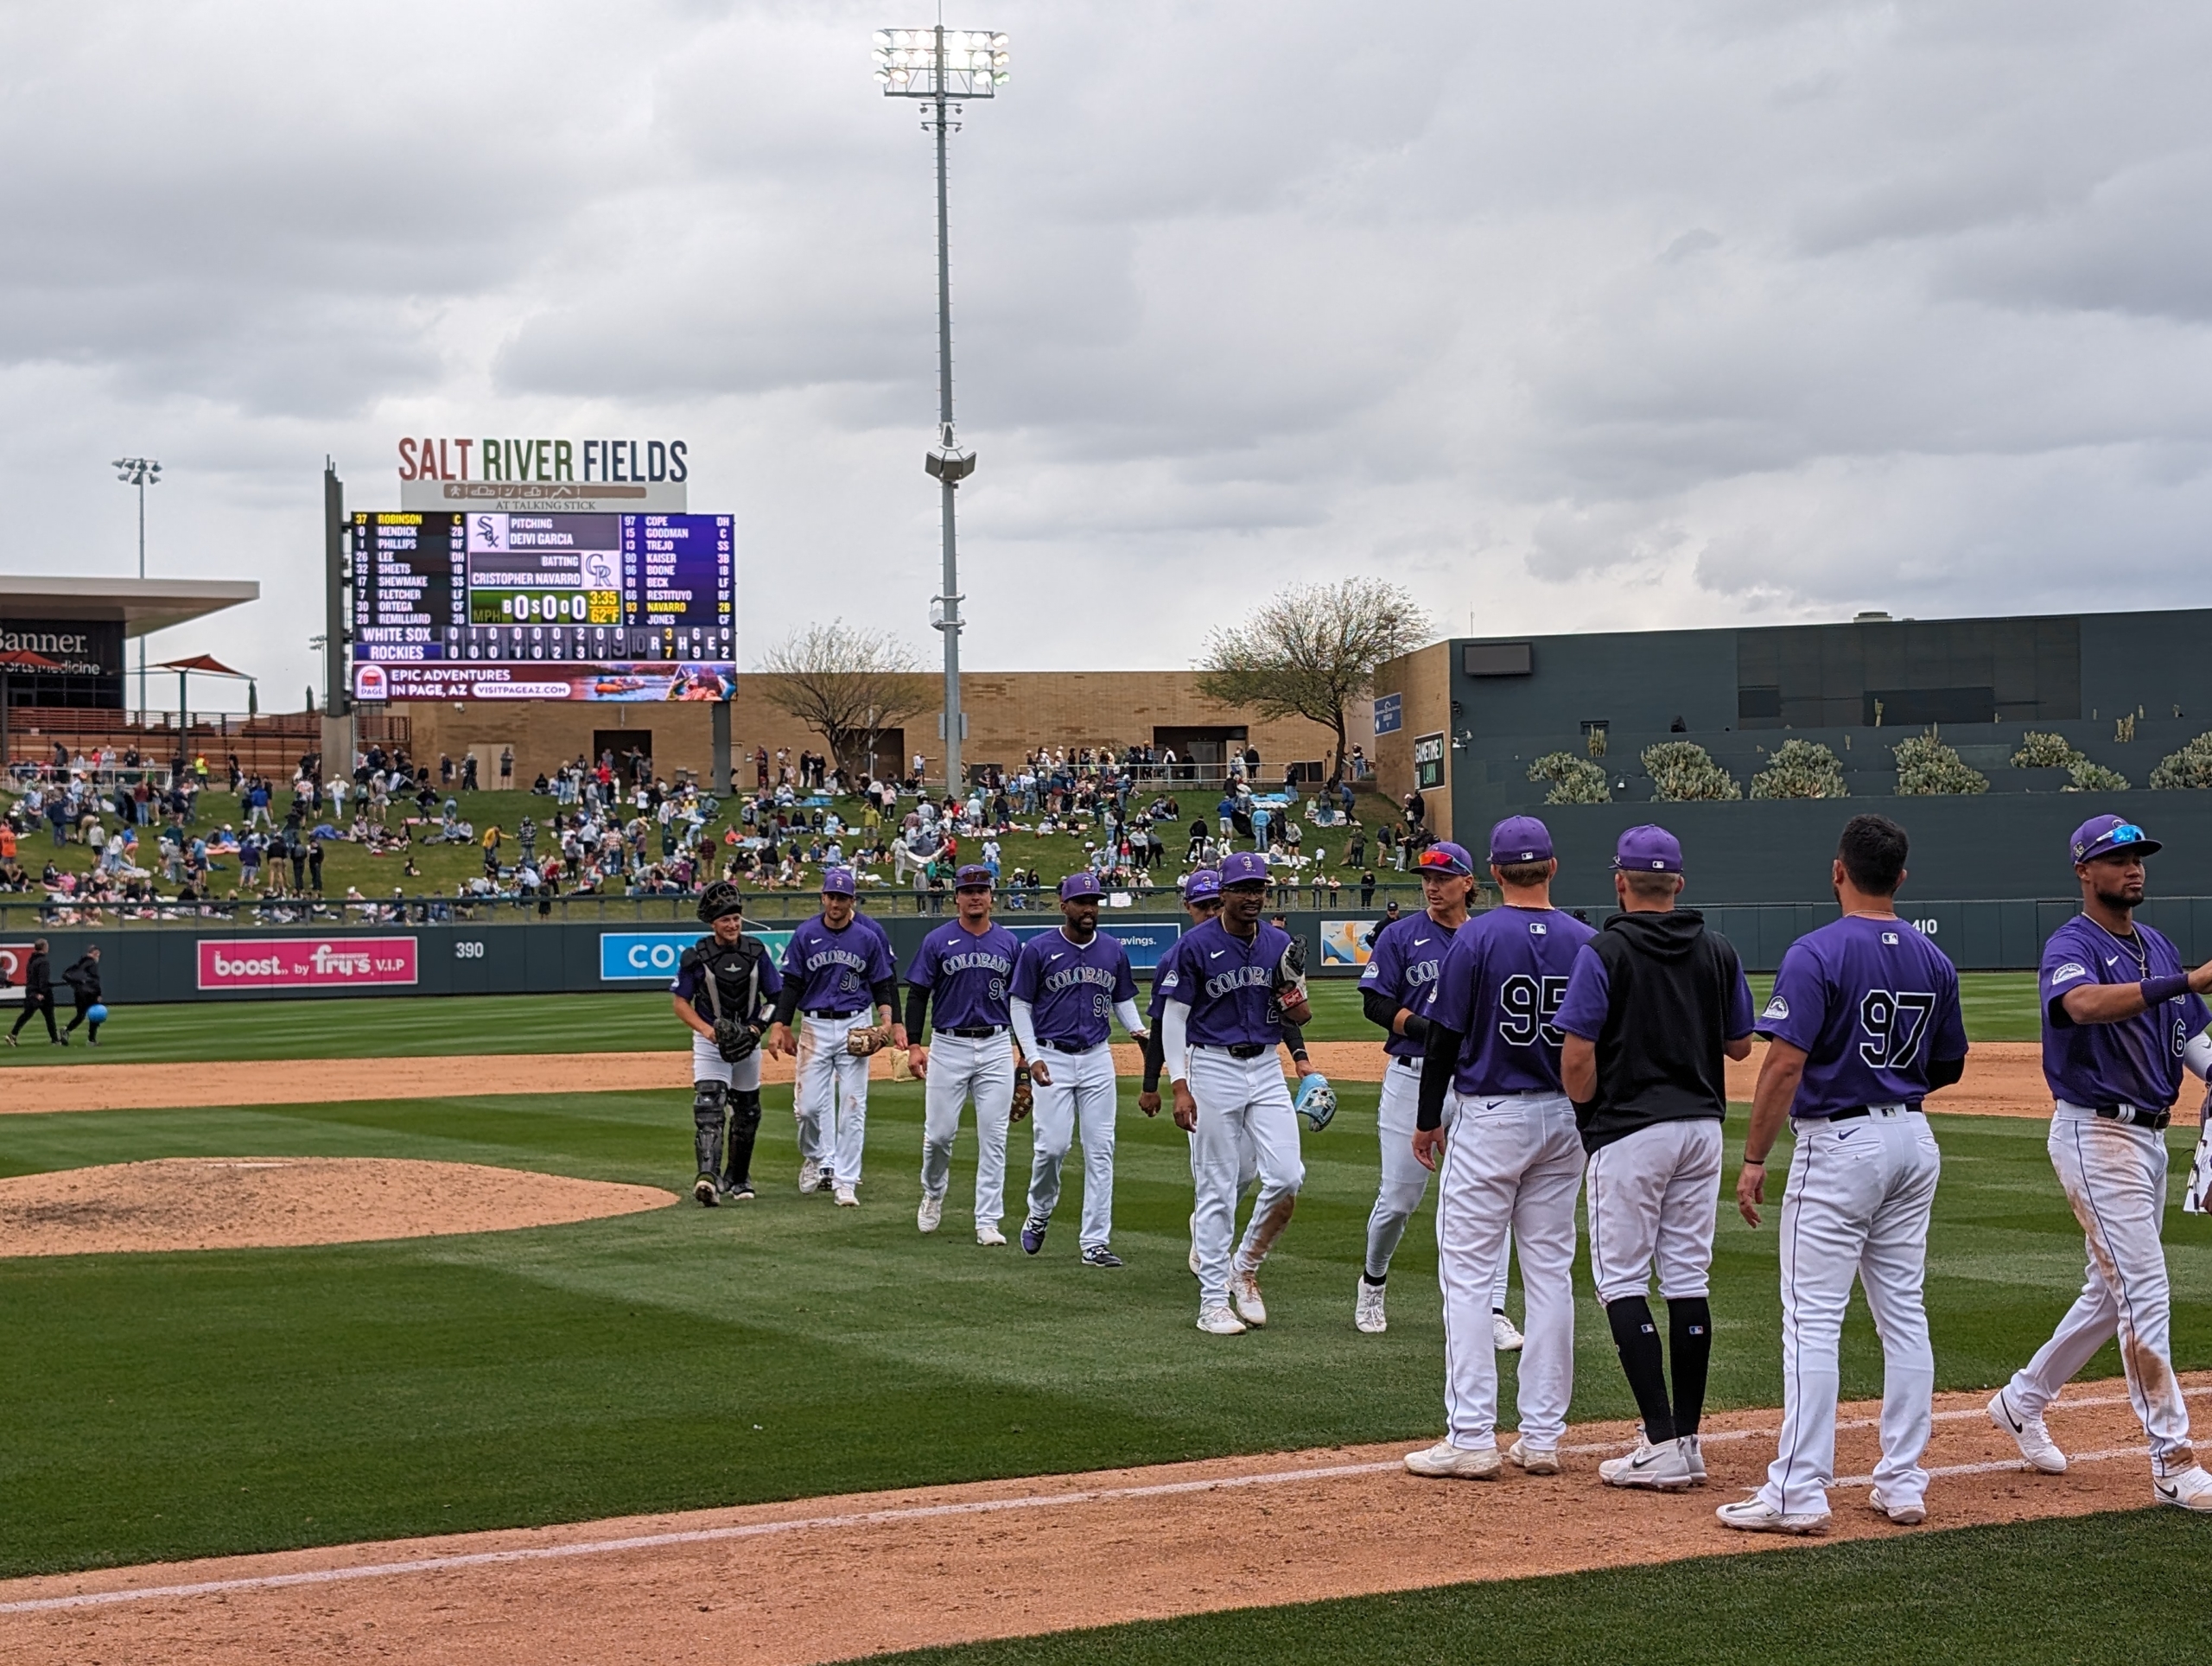 Rockies players celebrating a spring training victory over the White Sox